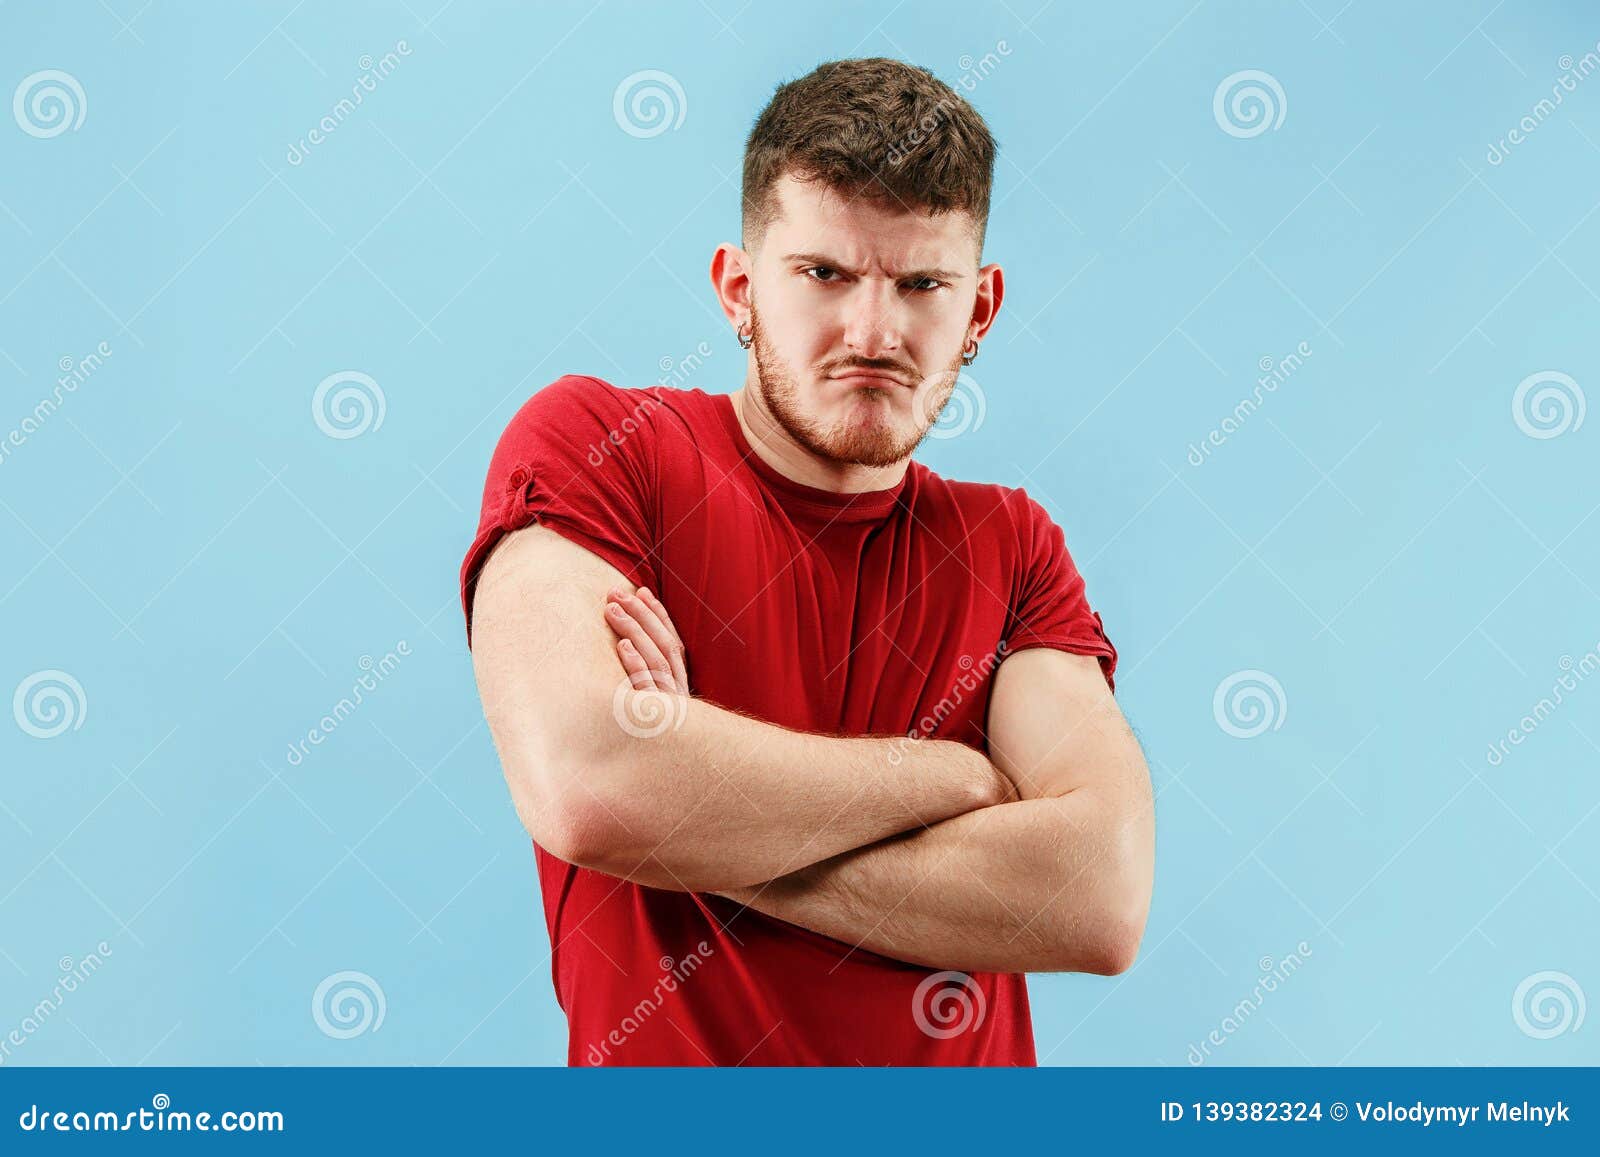 The Young Emotional Sad Angry Man on Blue Studio Background Stock ...